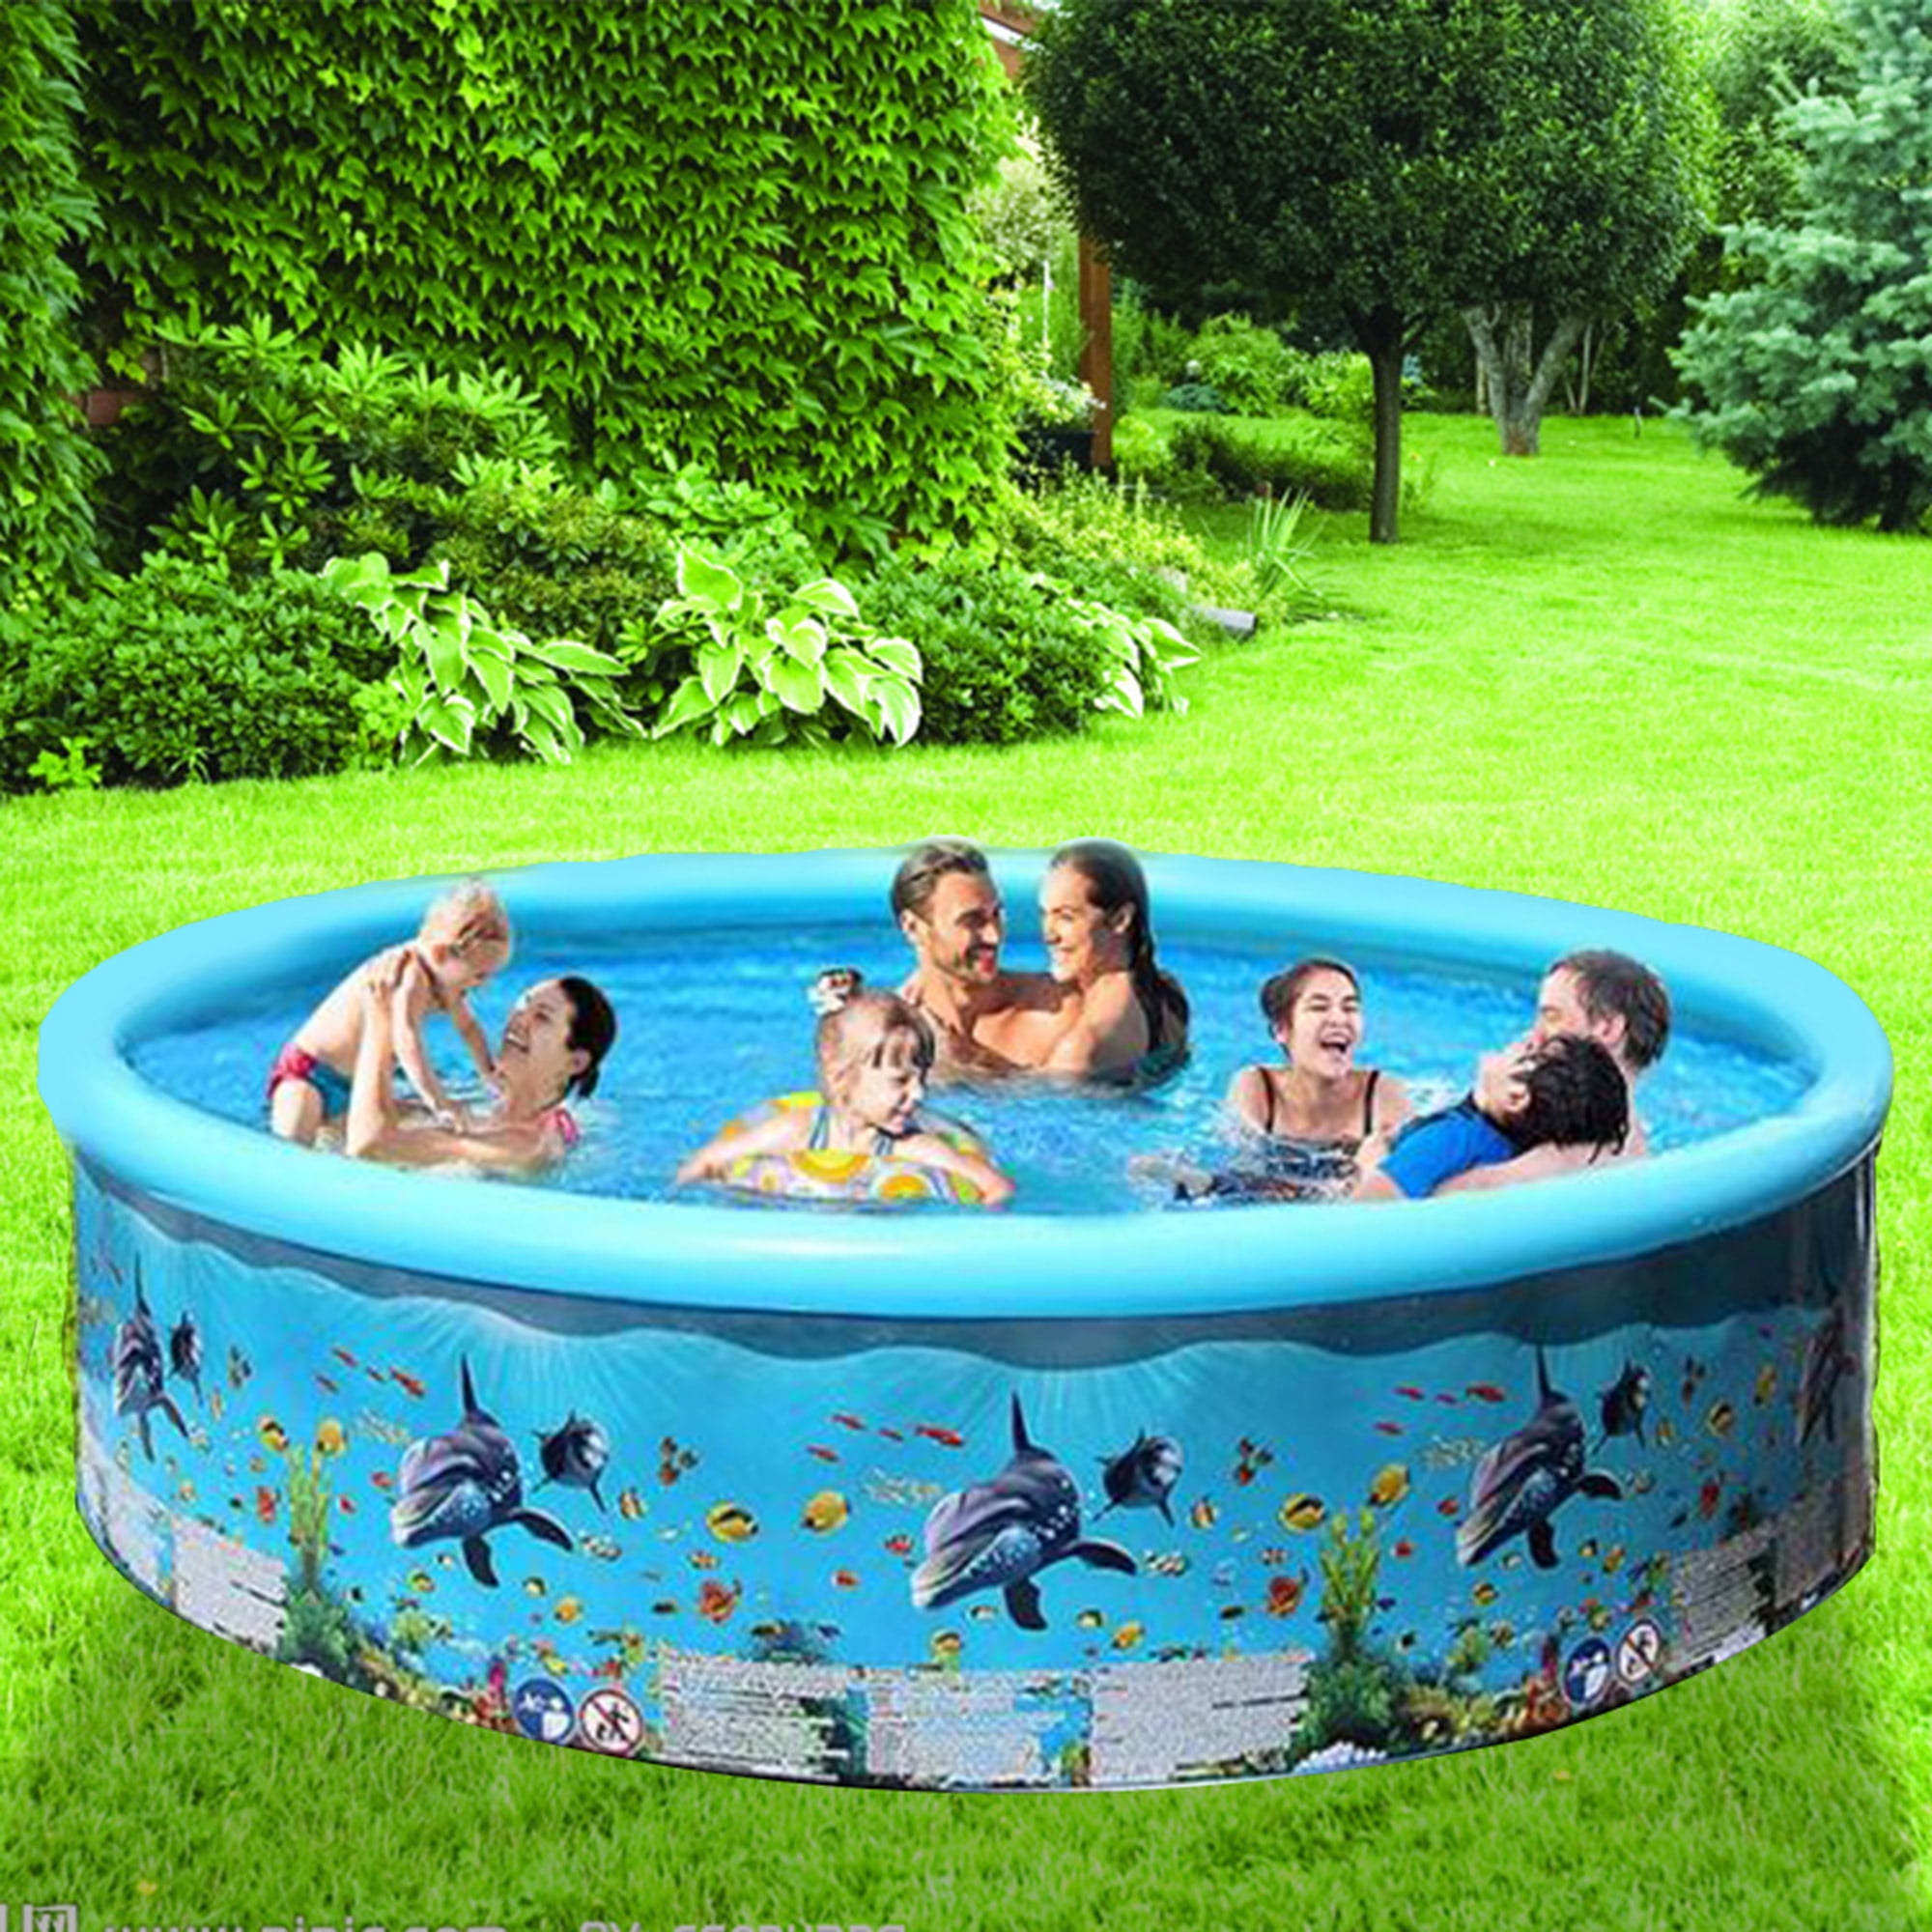 Global Wholesalers Selling Inflatable Pools for Kids Walmart Supplies Now - bitcoinhelp.fun